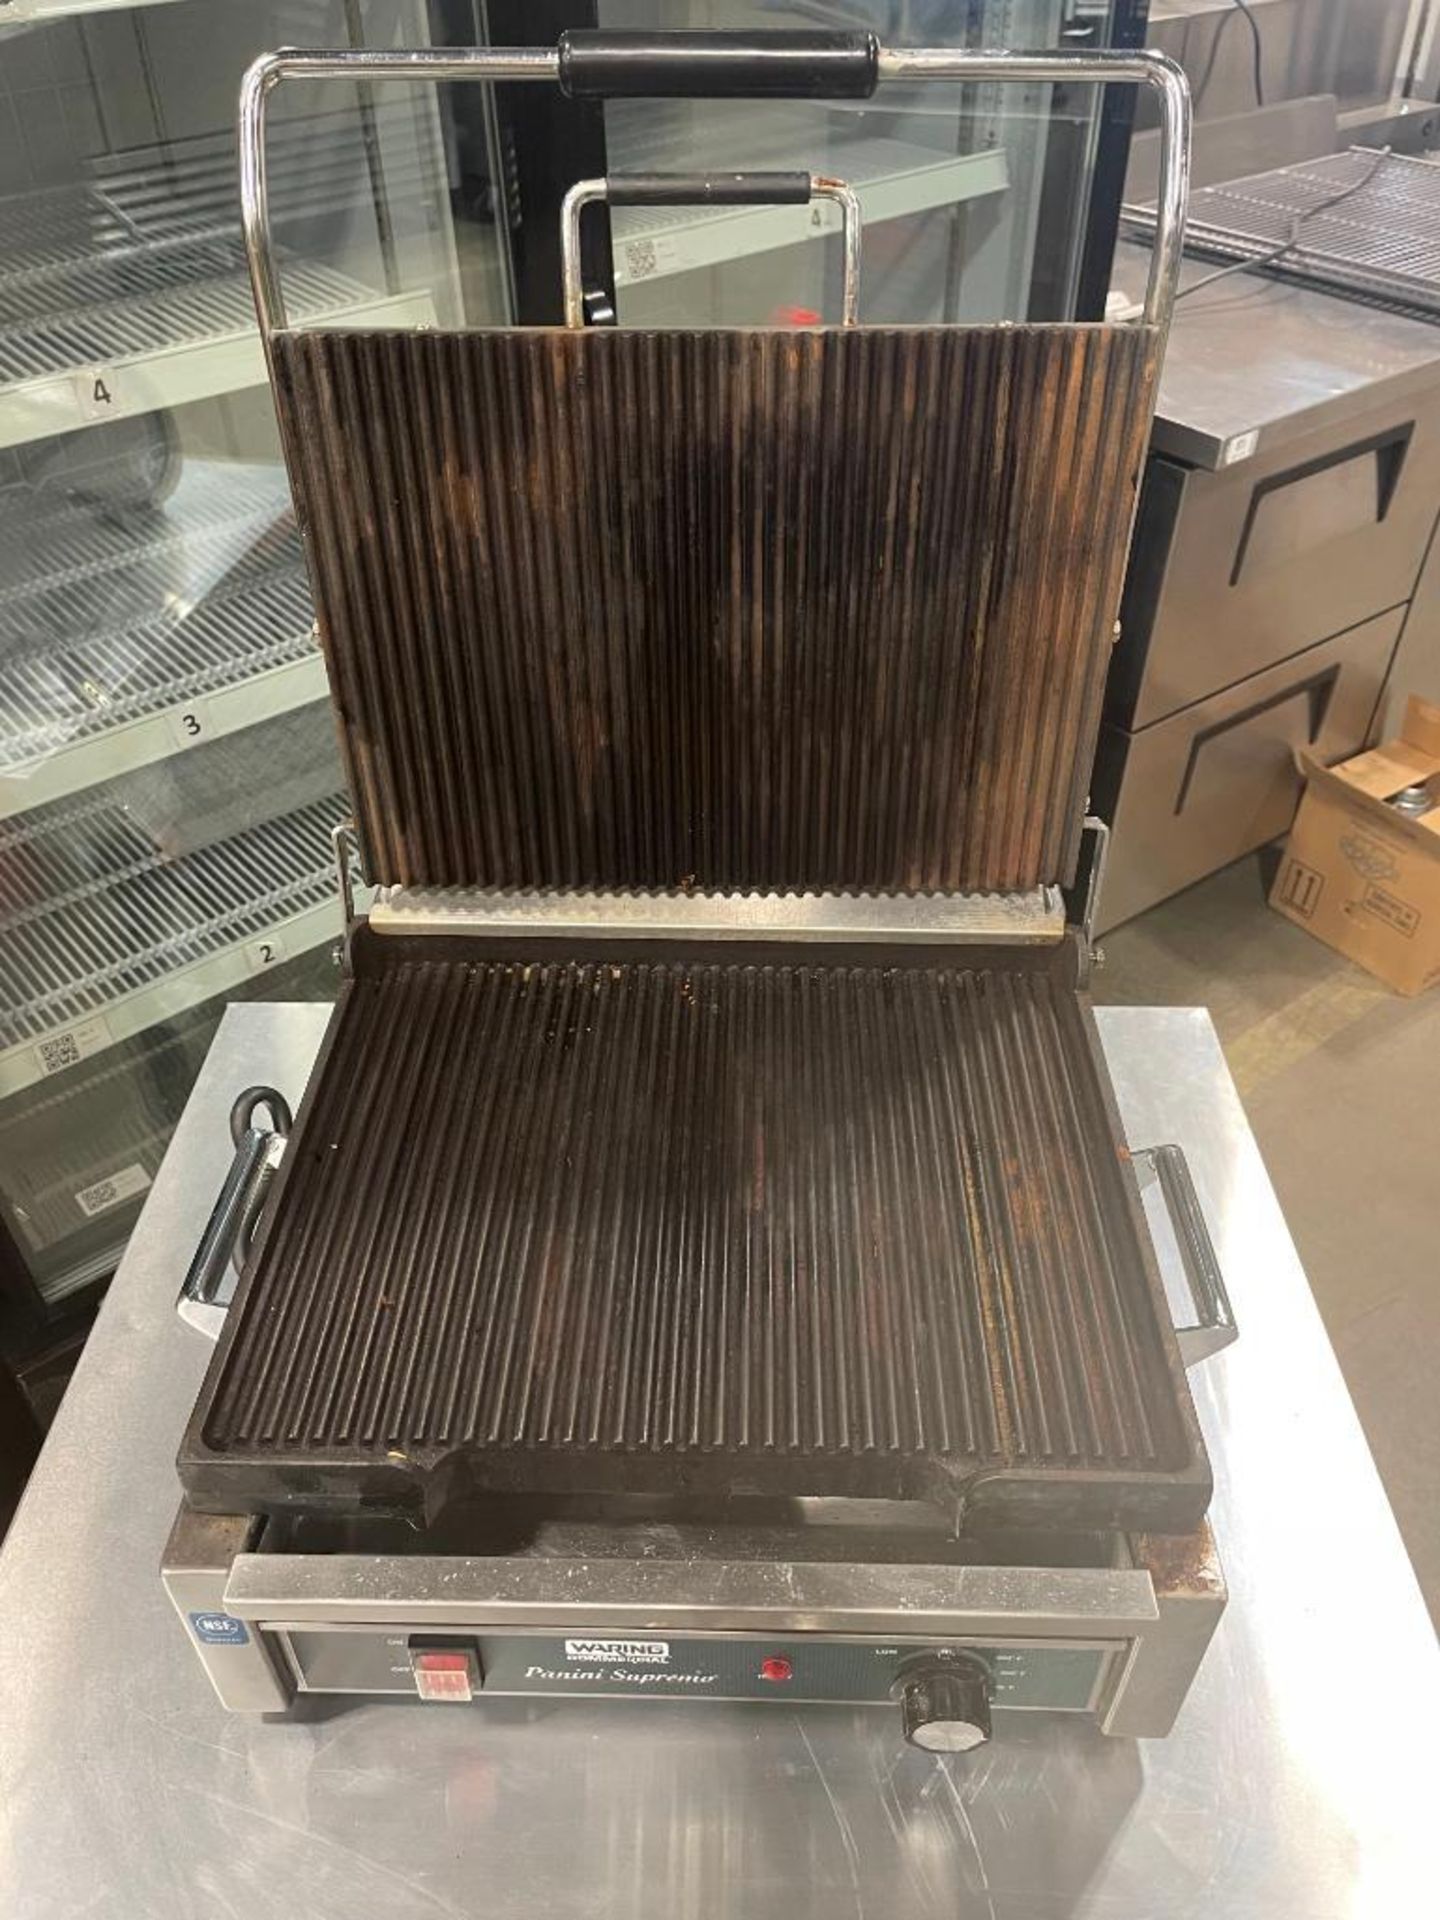 WARING COMMERCIAL WPG250C PANINI SUPREMO GRILL - Image 4 of 9